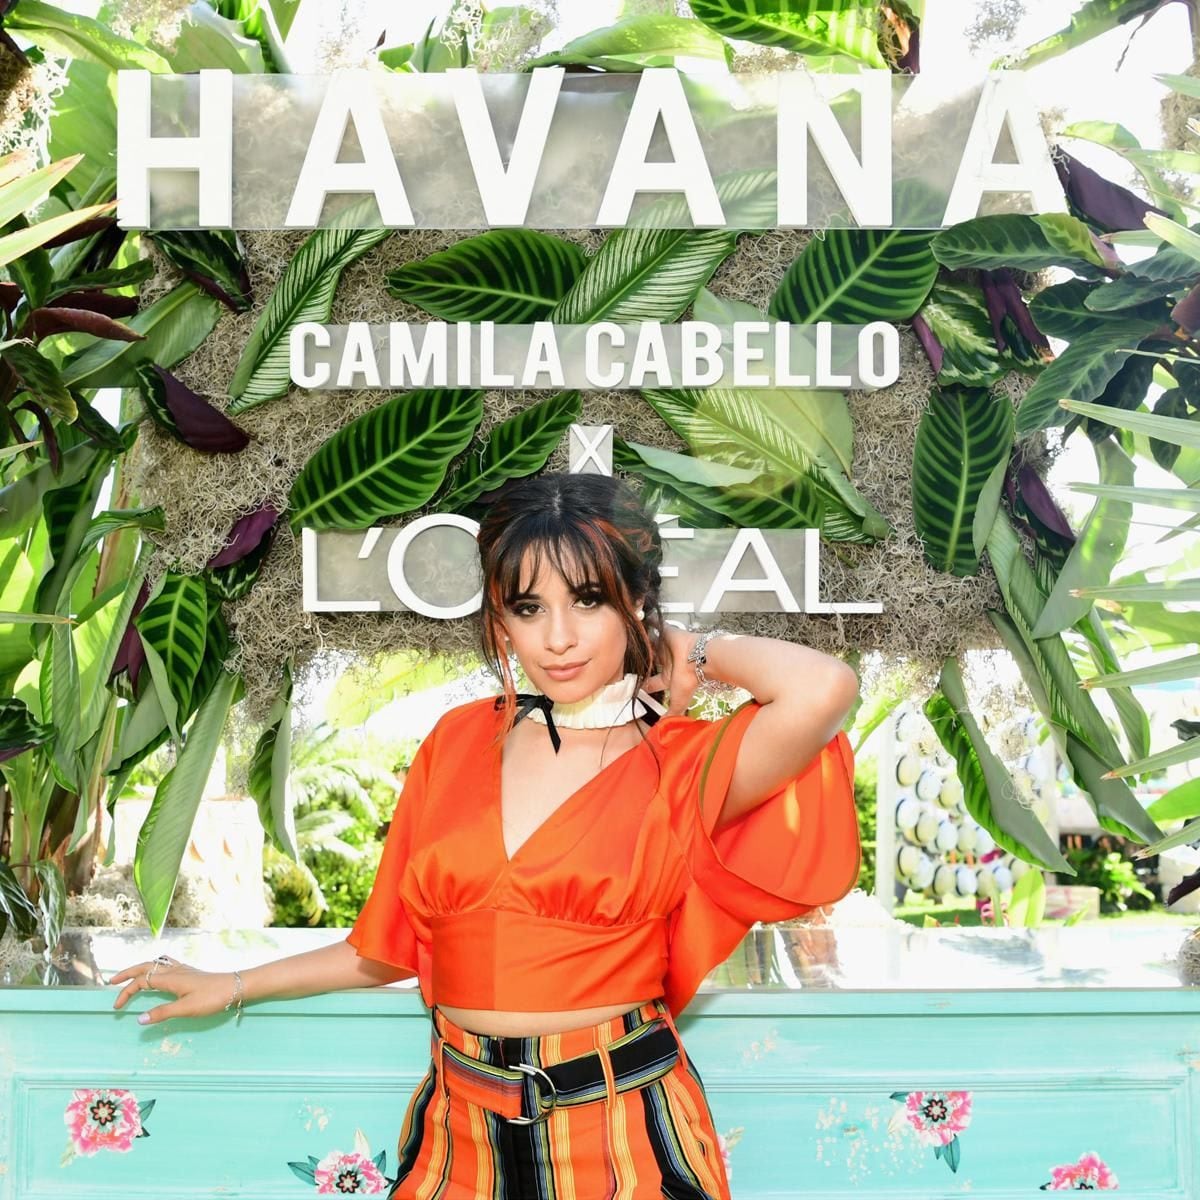 Camila Cabello and L'Oreal Paris Celebrate the launch of the HAVANA makeup collection